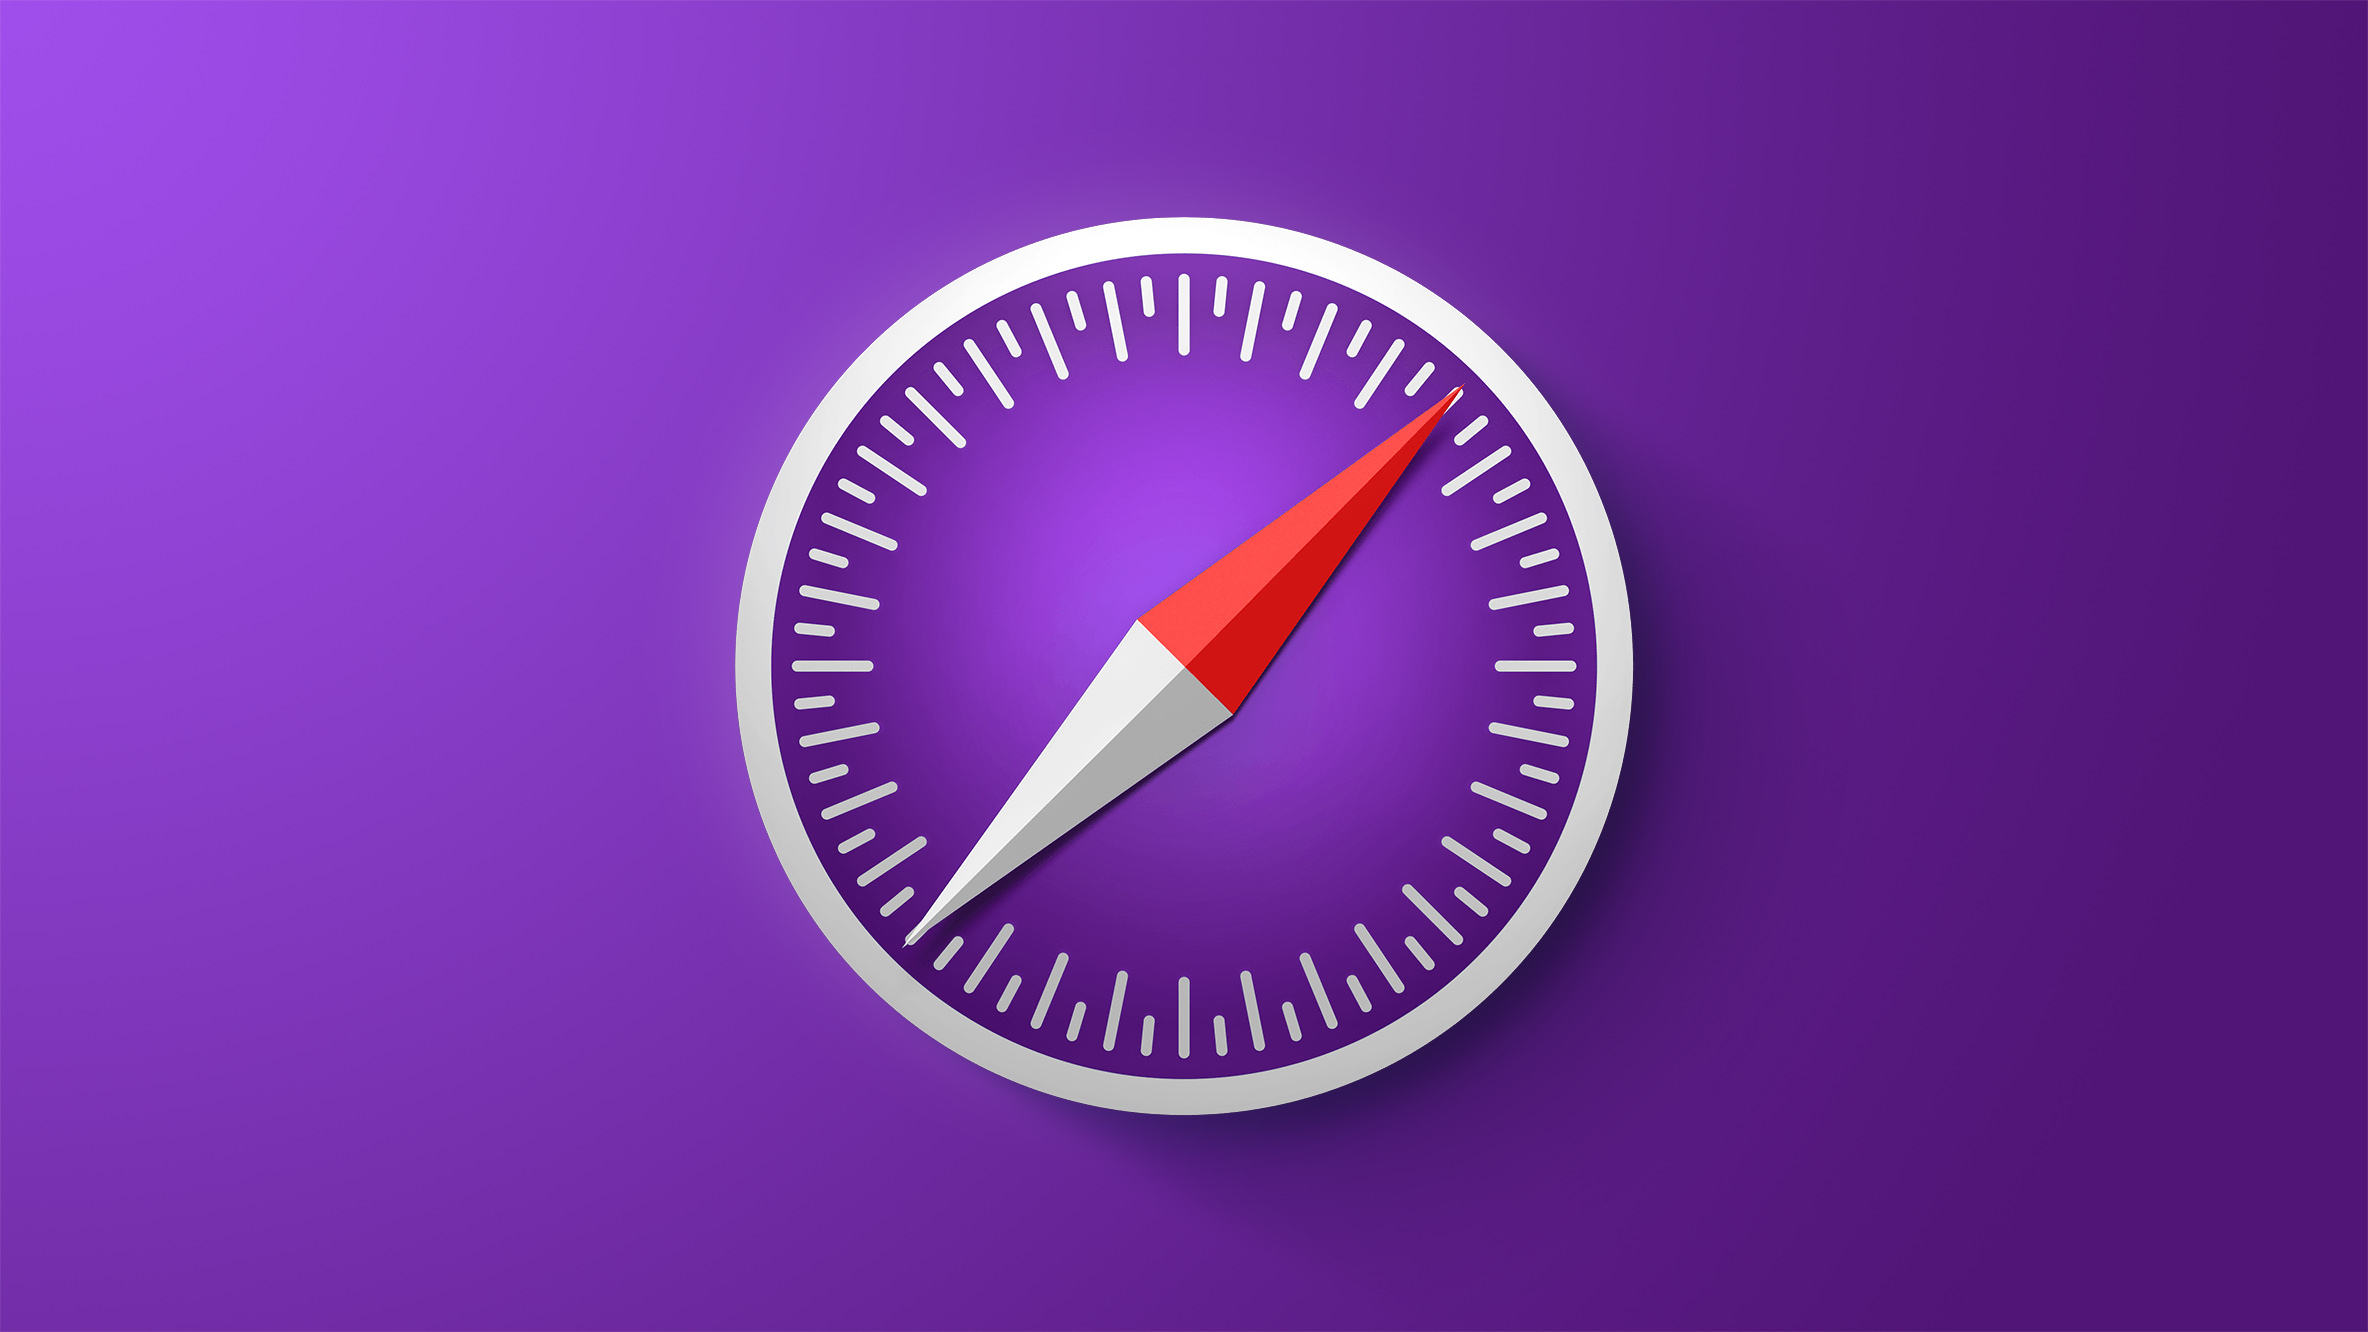 Apple Releases Safari Technology Preview 157 With Bug Fixes and Performance Improvements